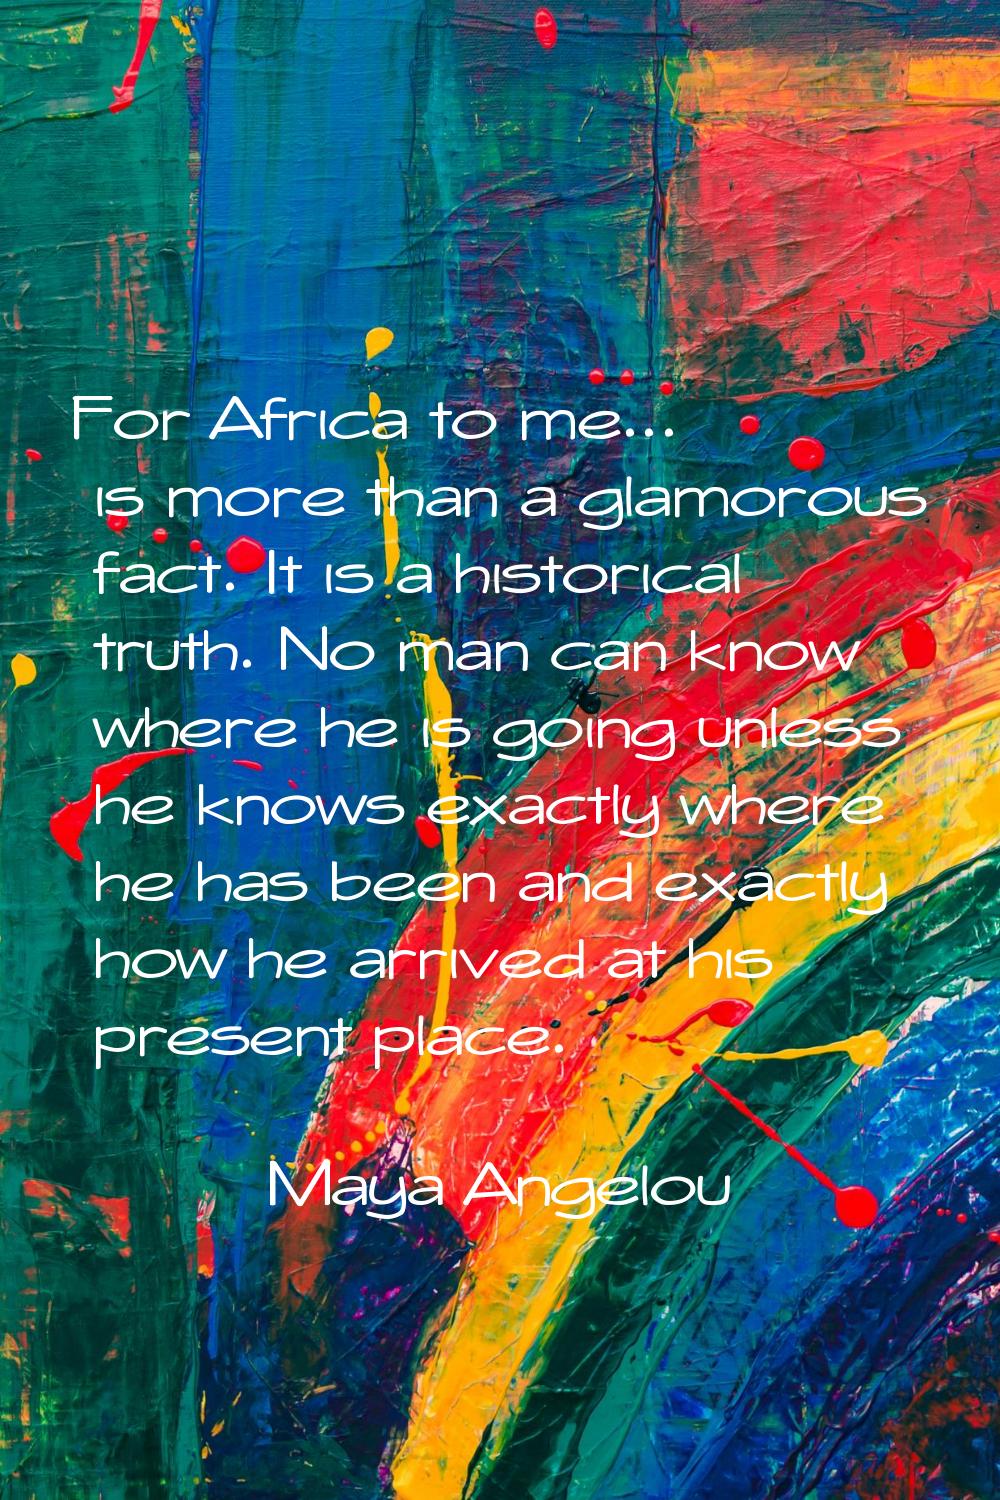 For Africa to me... is more than a glamorous fact. It is a historical truth. No man can know where 